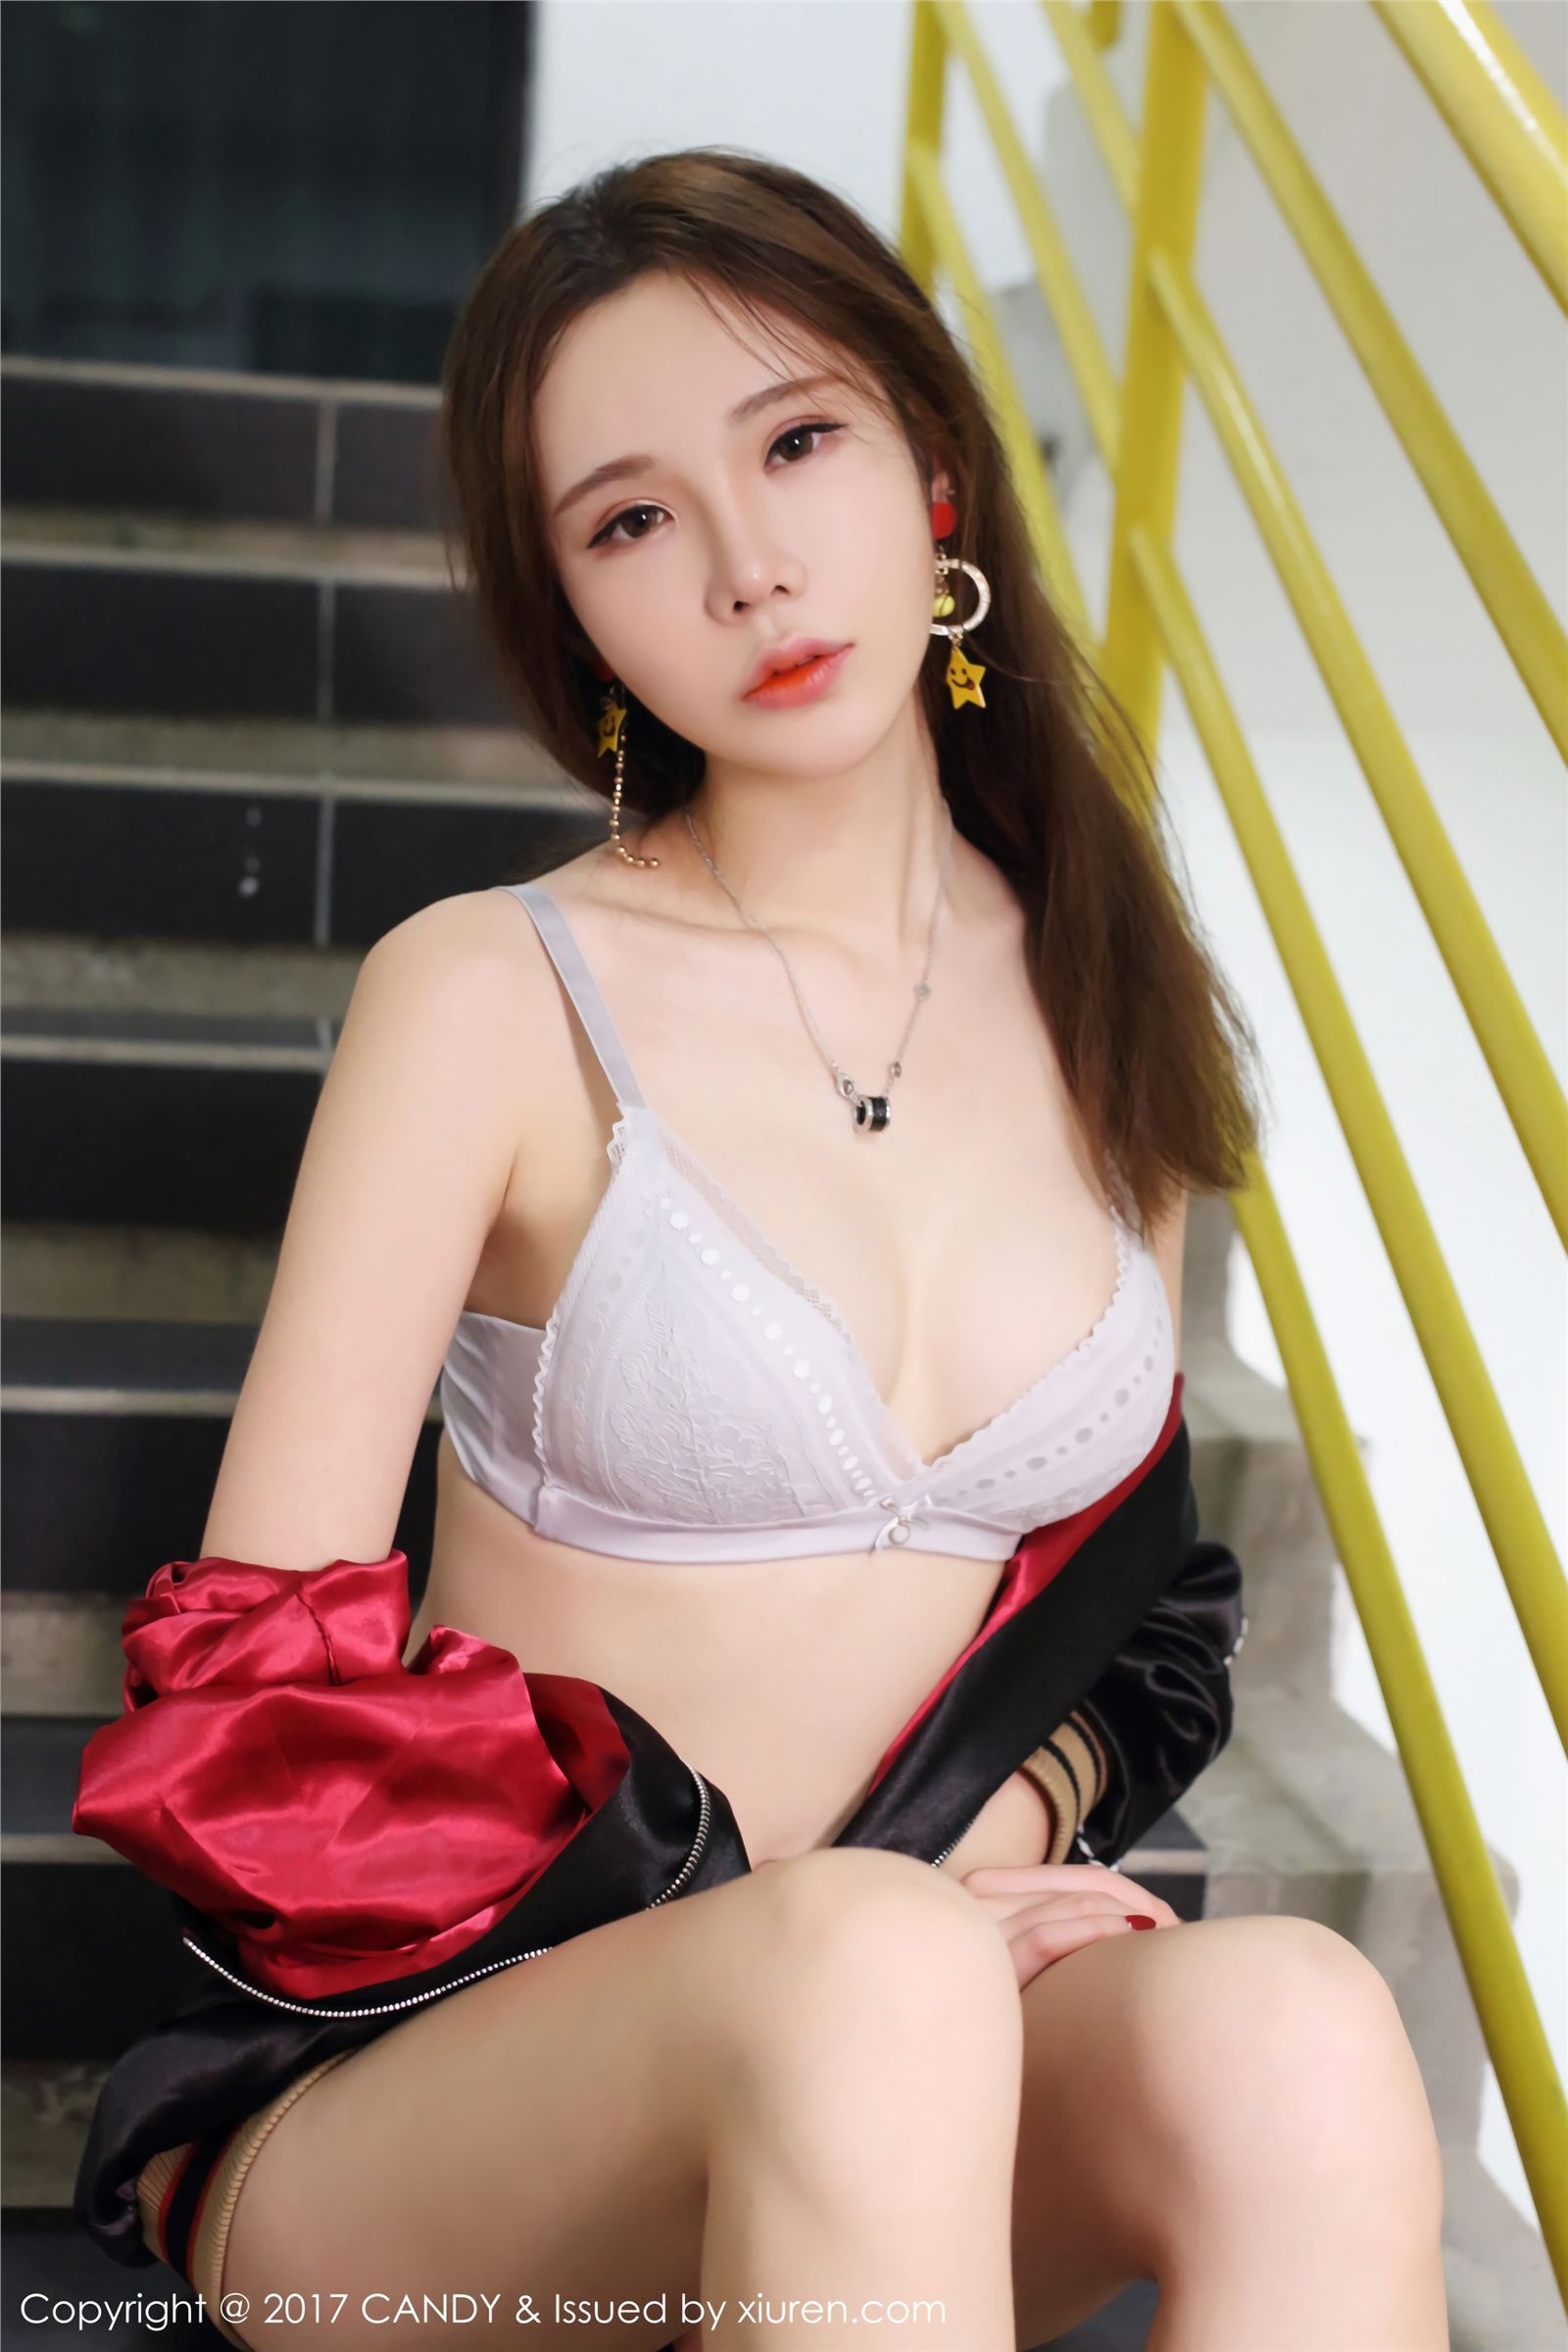 [candy pictorial] December 6, 2017 Vol.044 Mengqiqi Irene